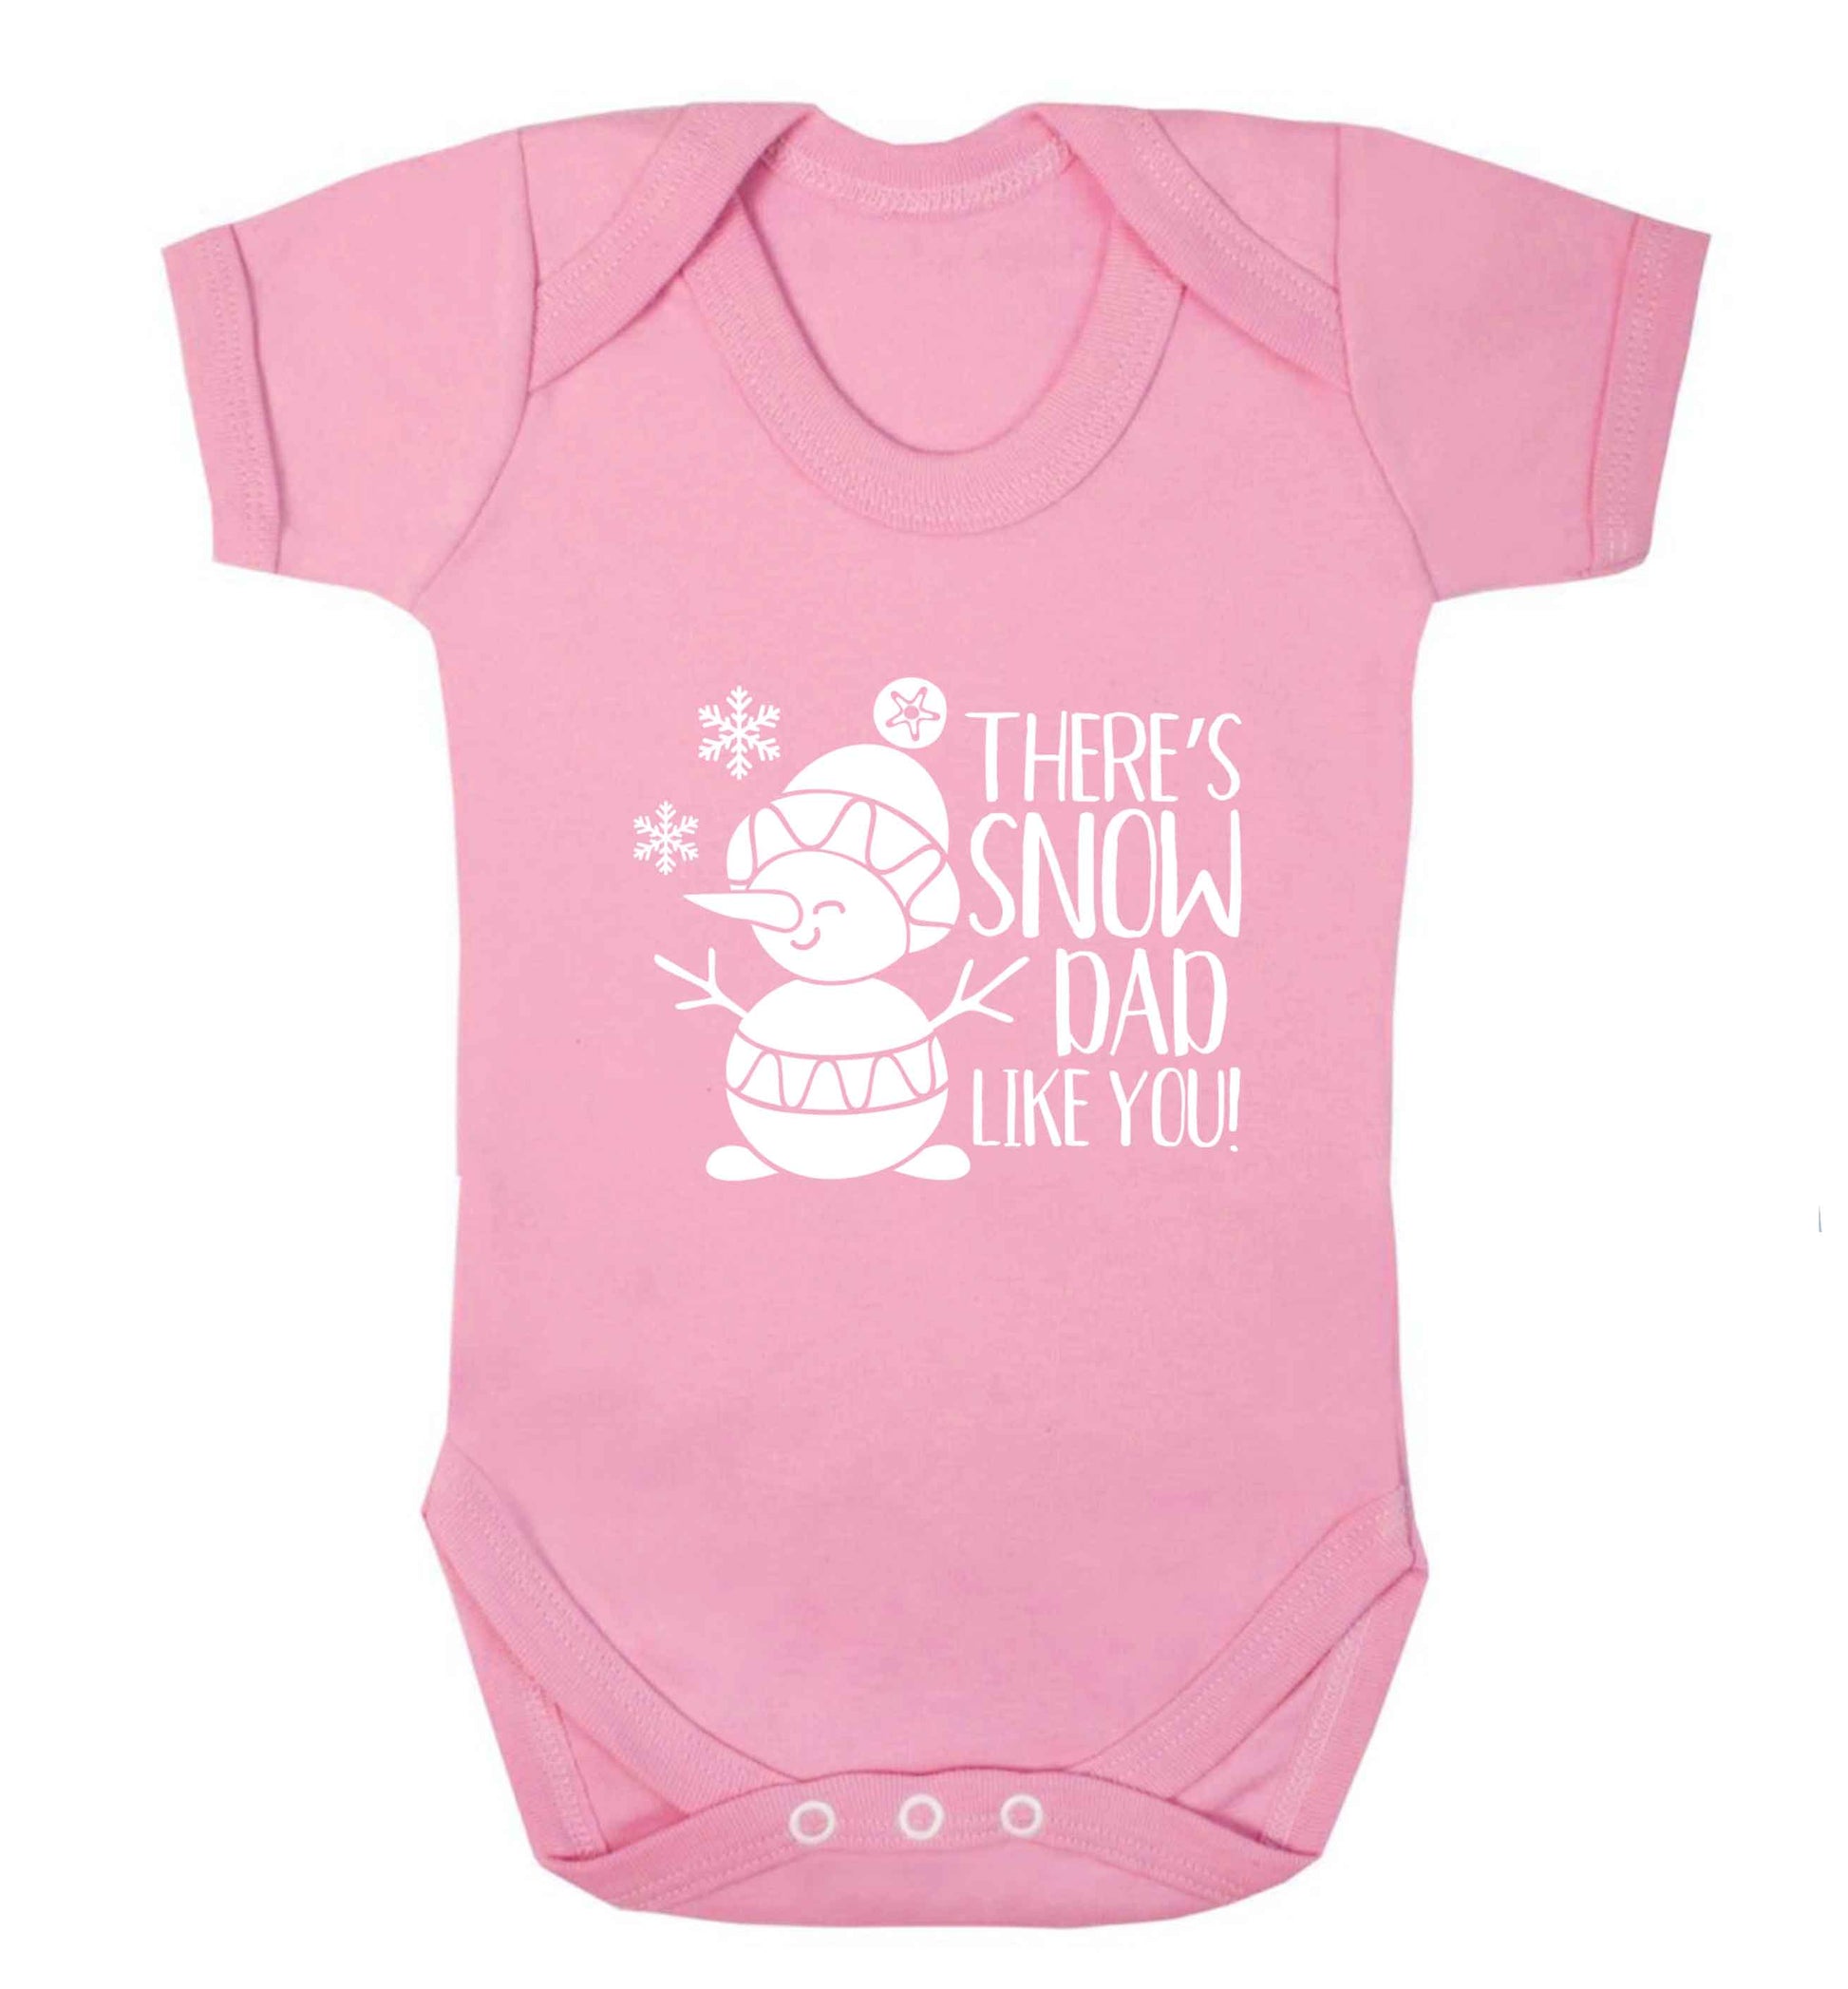 There's snow dad like you baby vest pale pink 18-24 months